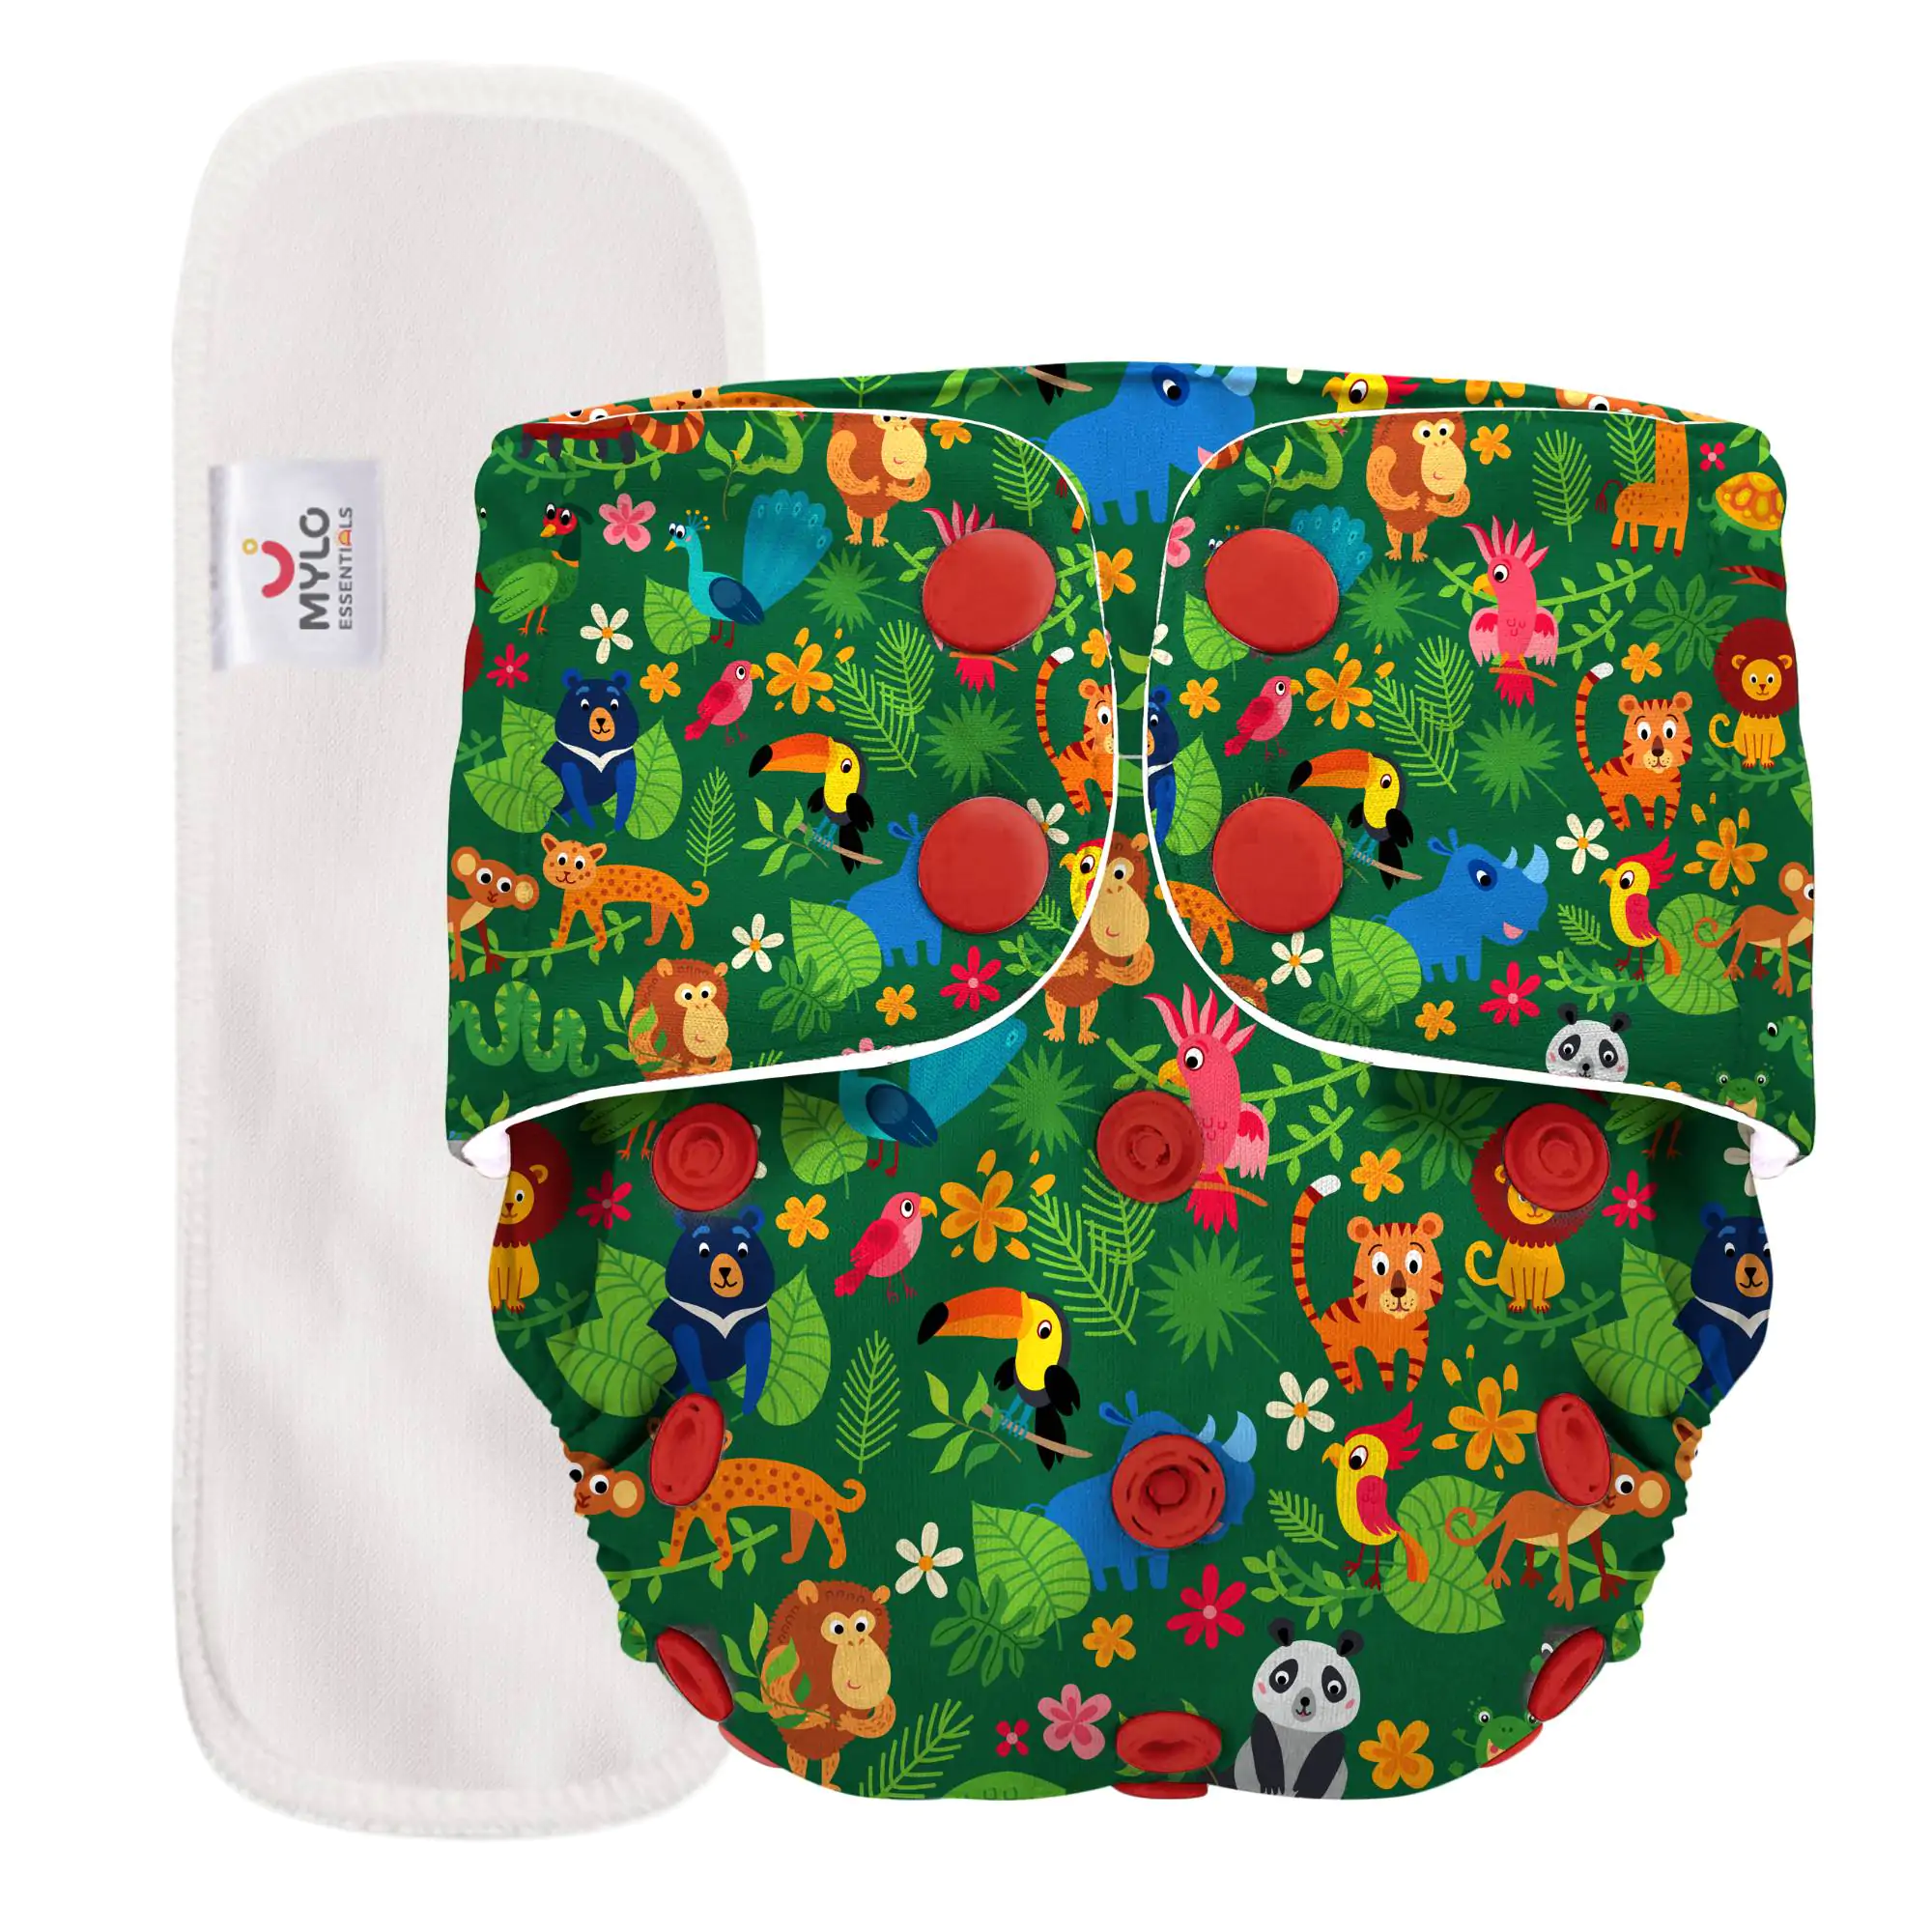 Mylo Adjustable Washable & Reusable Cloth Diaper With Dry Feel, Absorbent Insert Pad (3M-3Y) - Jungle 